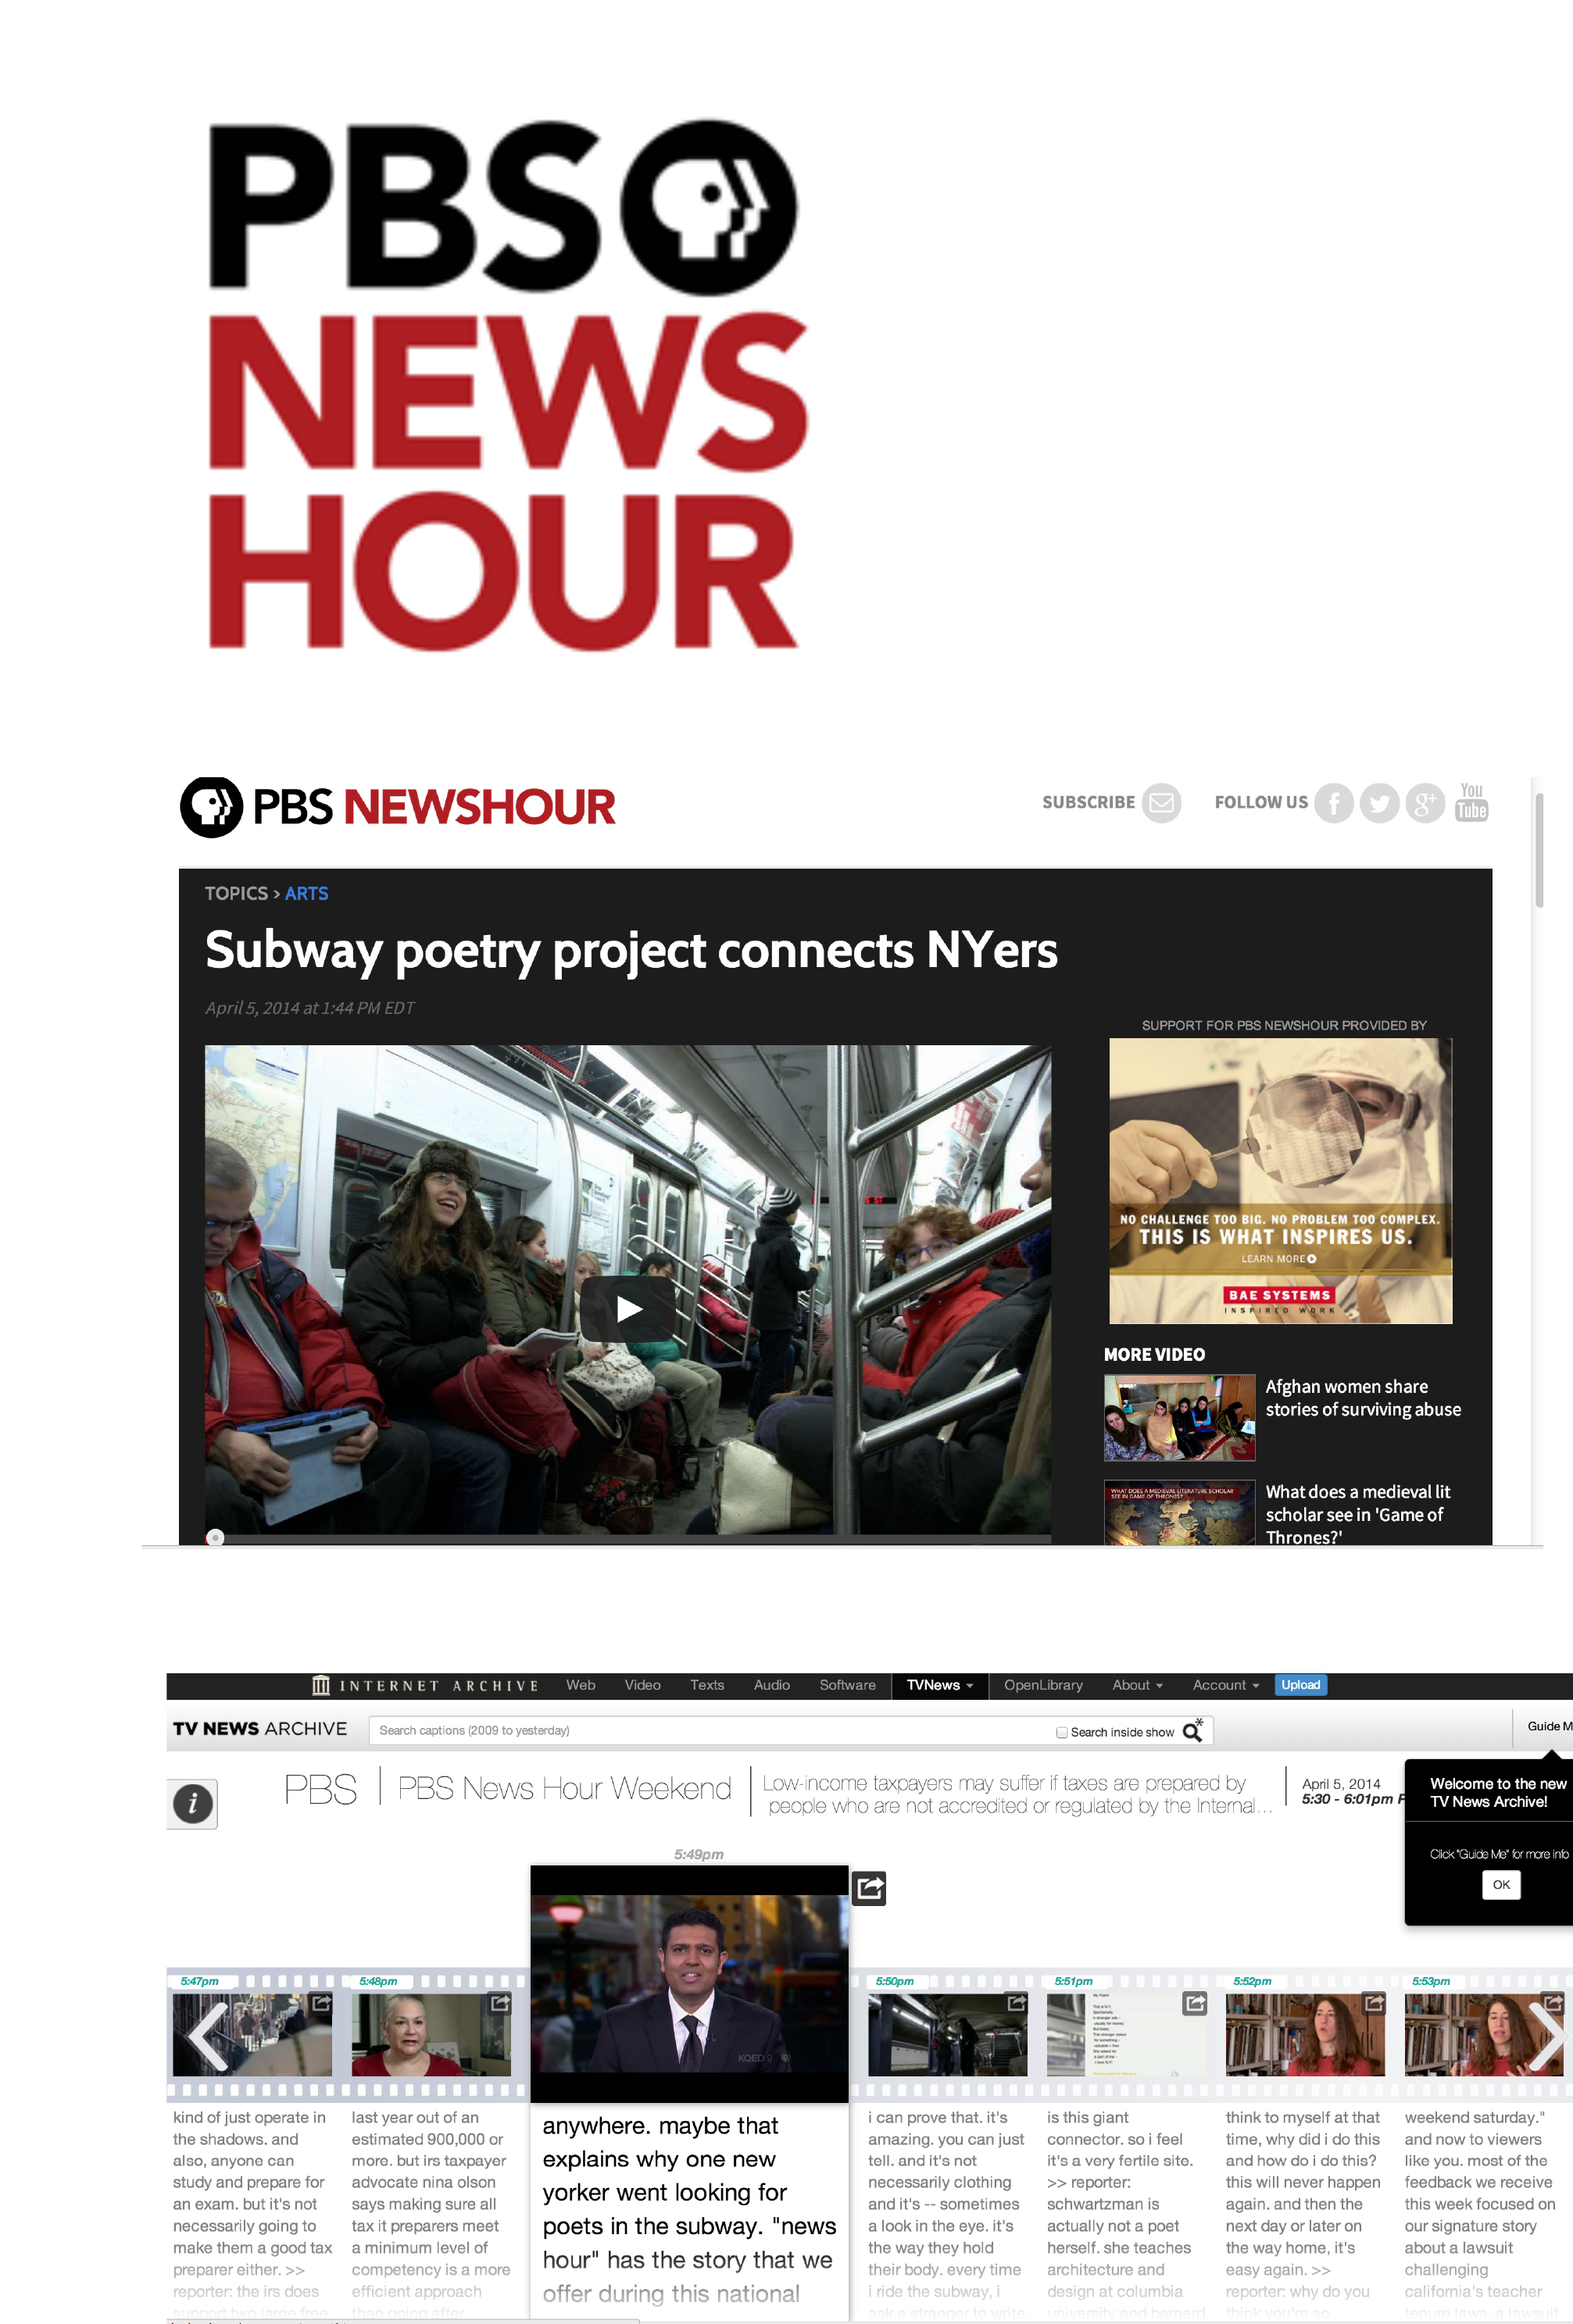 Poems by New Yorkers on PBS Weekend News Hour